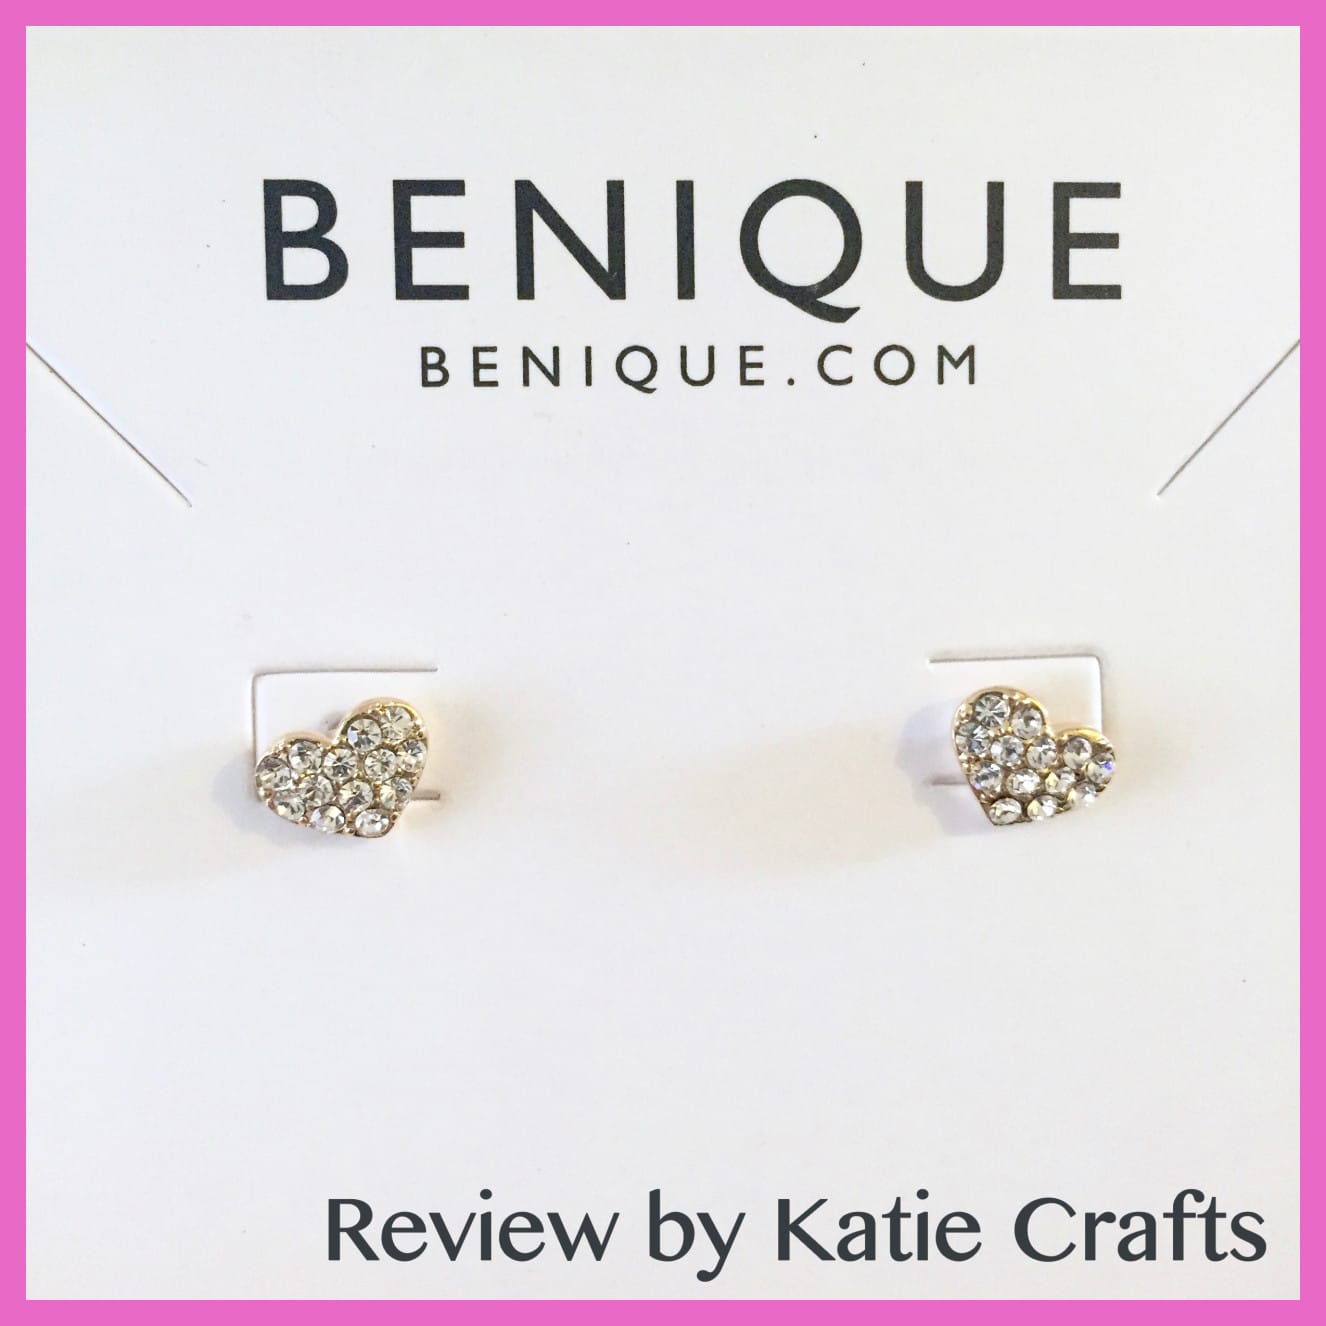 Benique Jewelry Review by Katie Crafts; https://www.katiecrafts.com